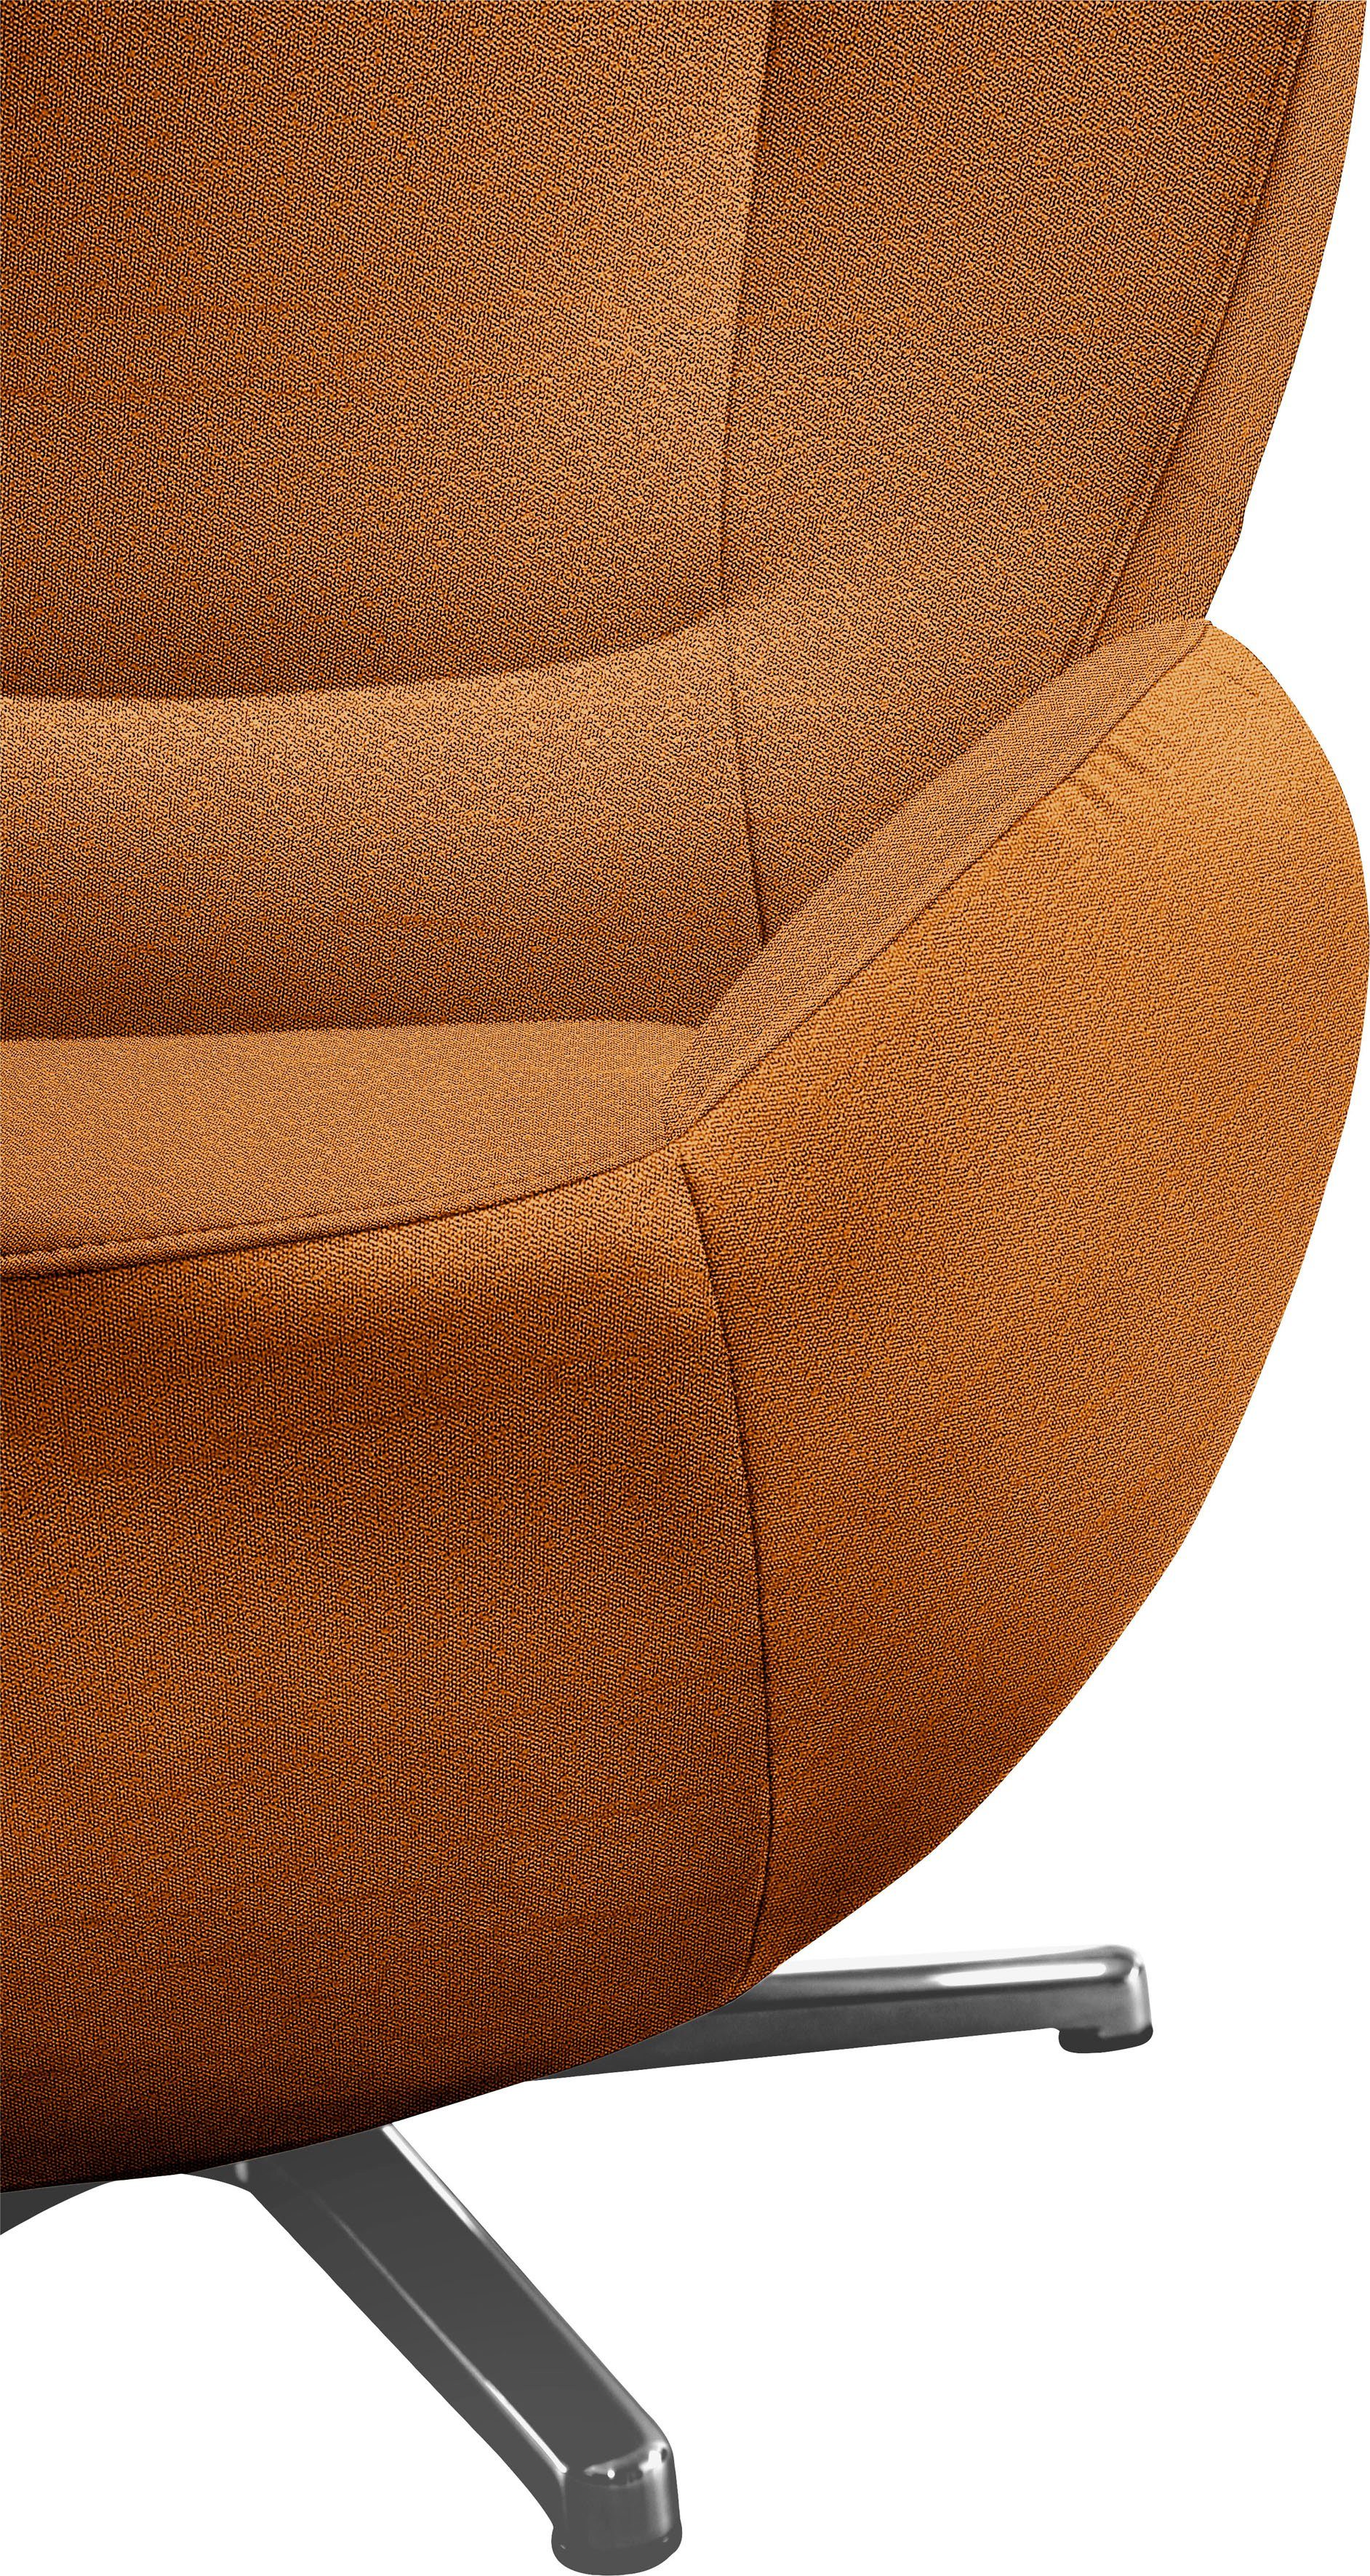 PURE, mit TOM TOM Metall-Drehfuß Chrom TAILOR HOME Loungesessel in